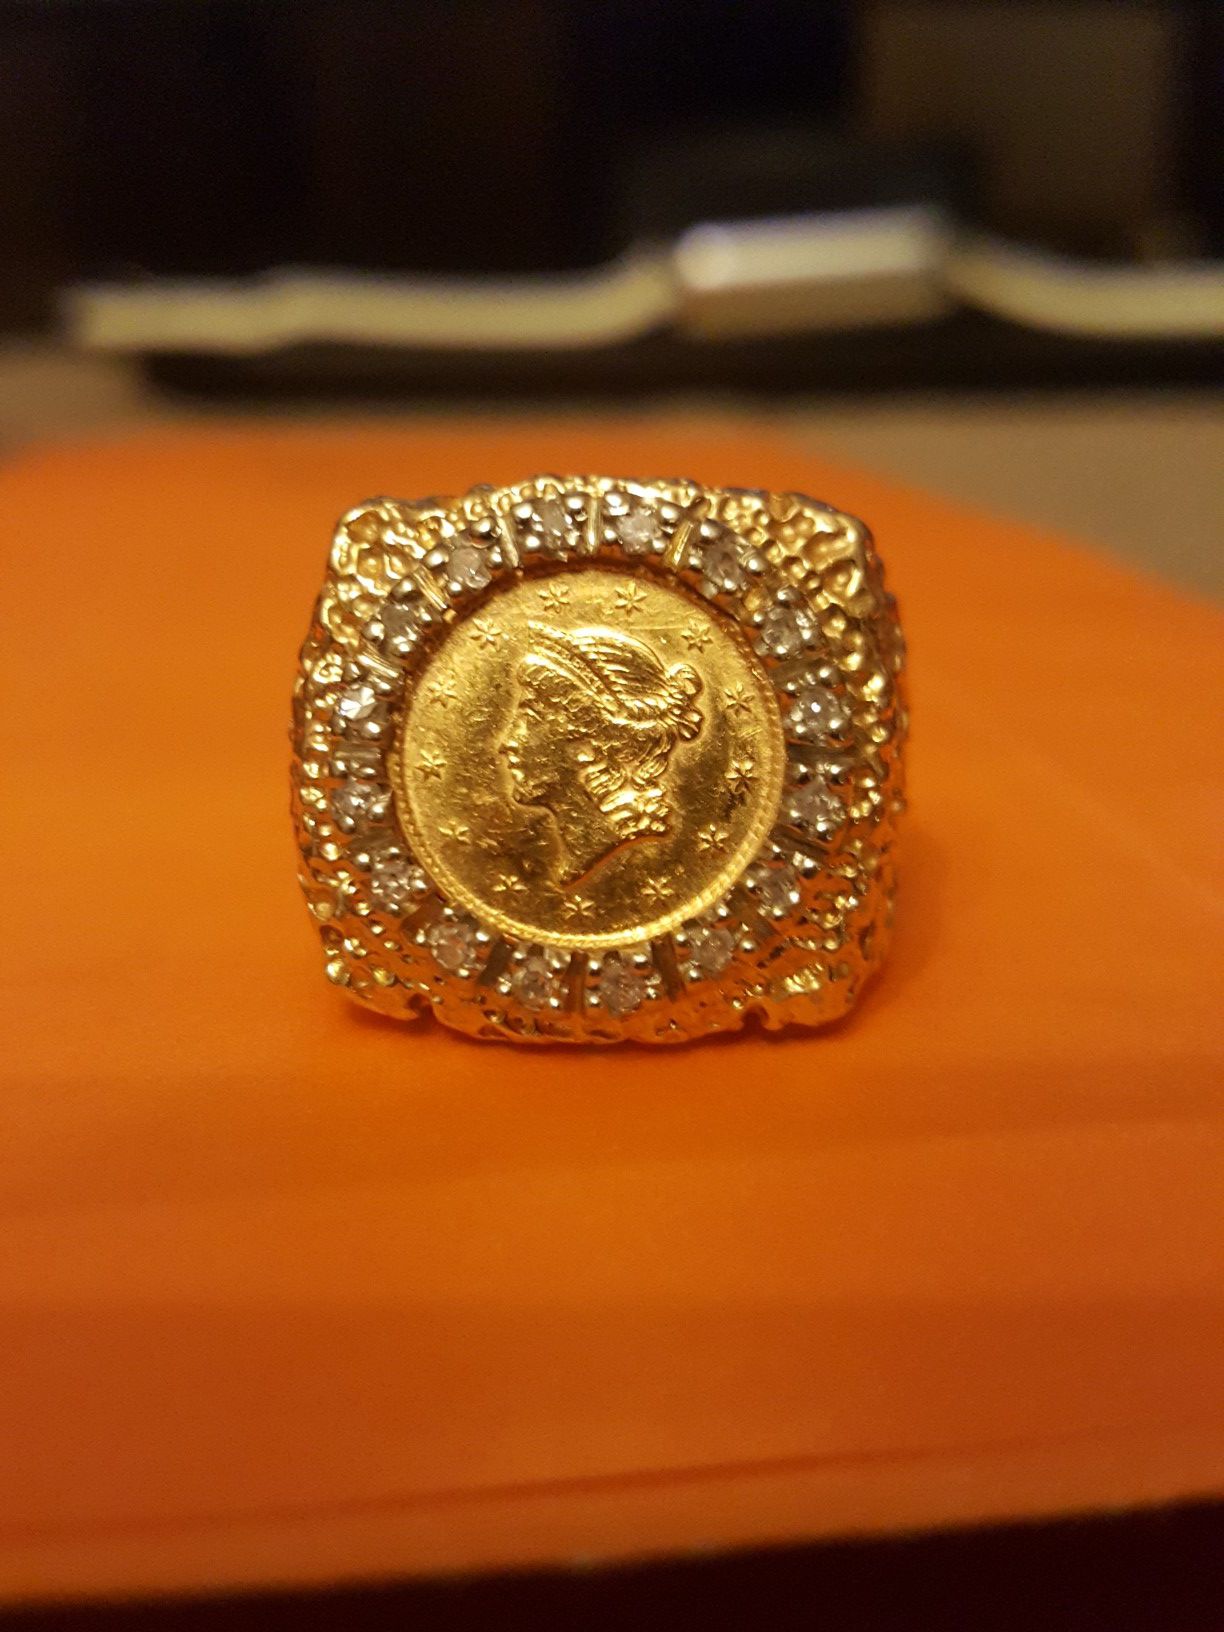 GOLD COIN RING W/ONE DOLLAR LIBERTY GOLD COIN 1851 SIZE 8 DIAMOND BEZEL RING IS 10K, 11.3 GRAMS NUGGET STYLE .I AM FIRM $950. YES STILL AVAILABLE.